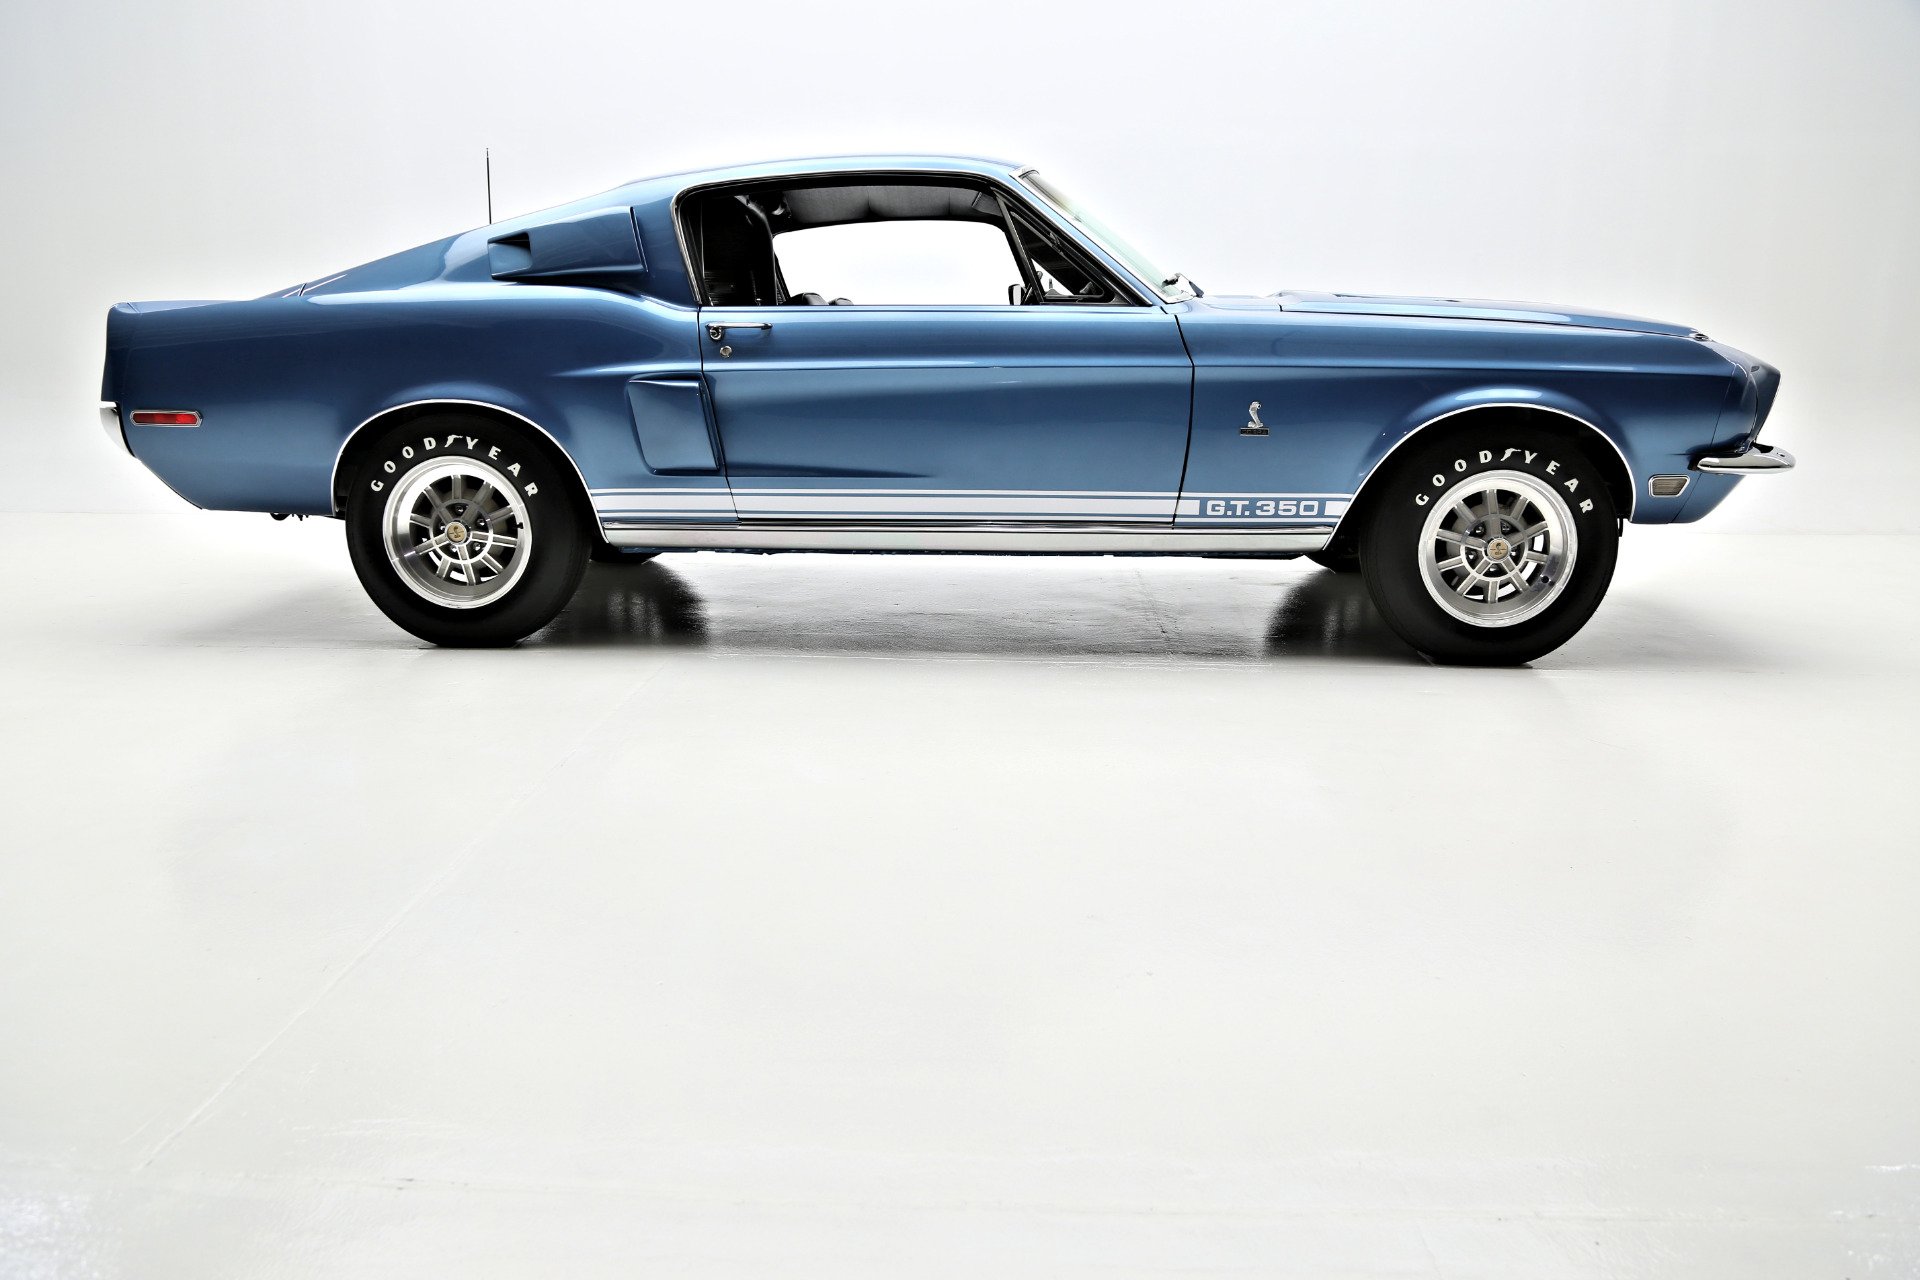 1968, Shelby, Cobra, Gt350, Fastback, Muscle, Classic, Ford, Mustang Wallpaper